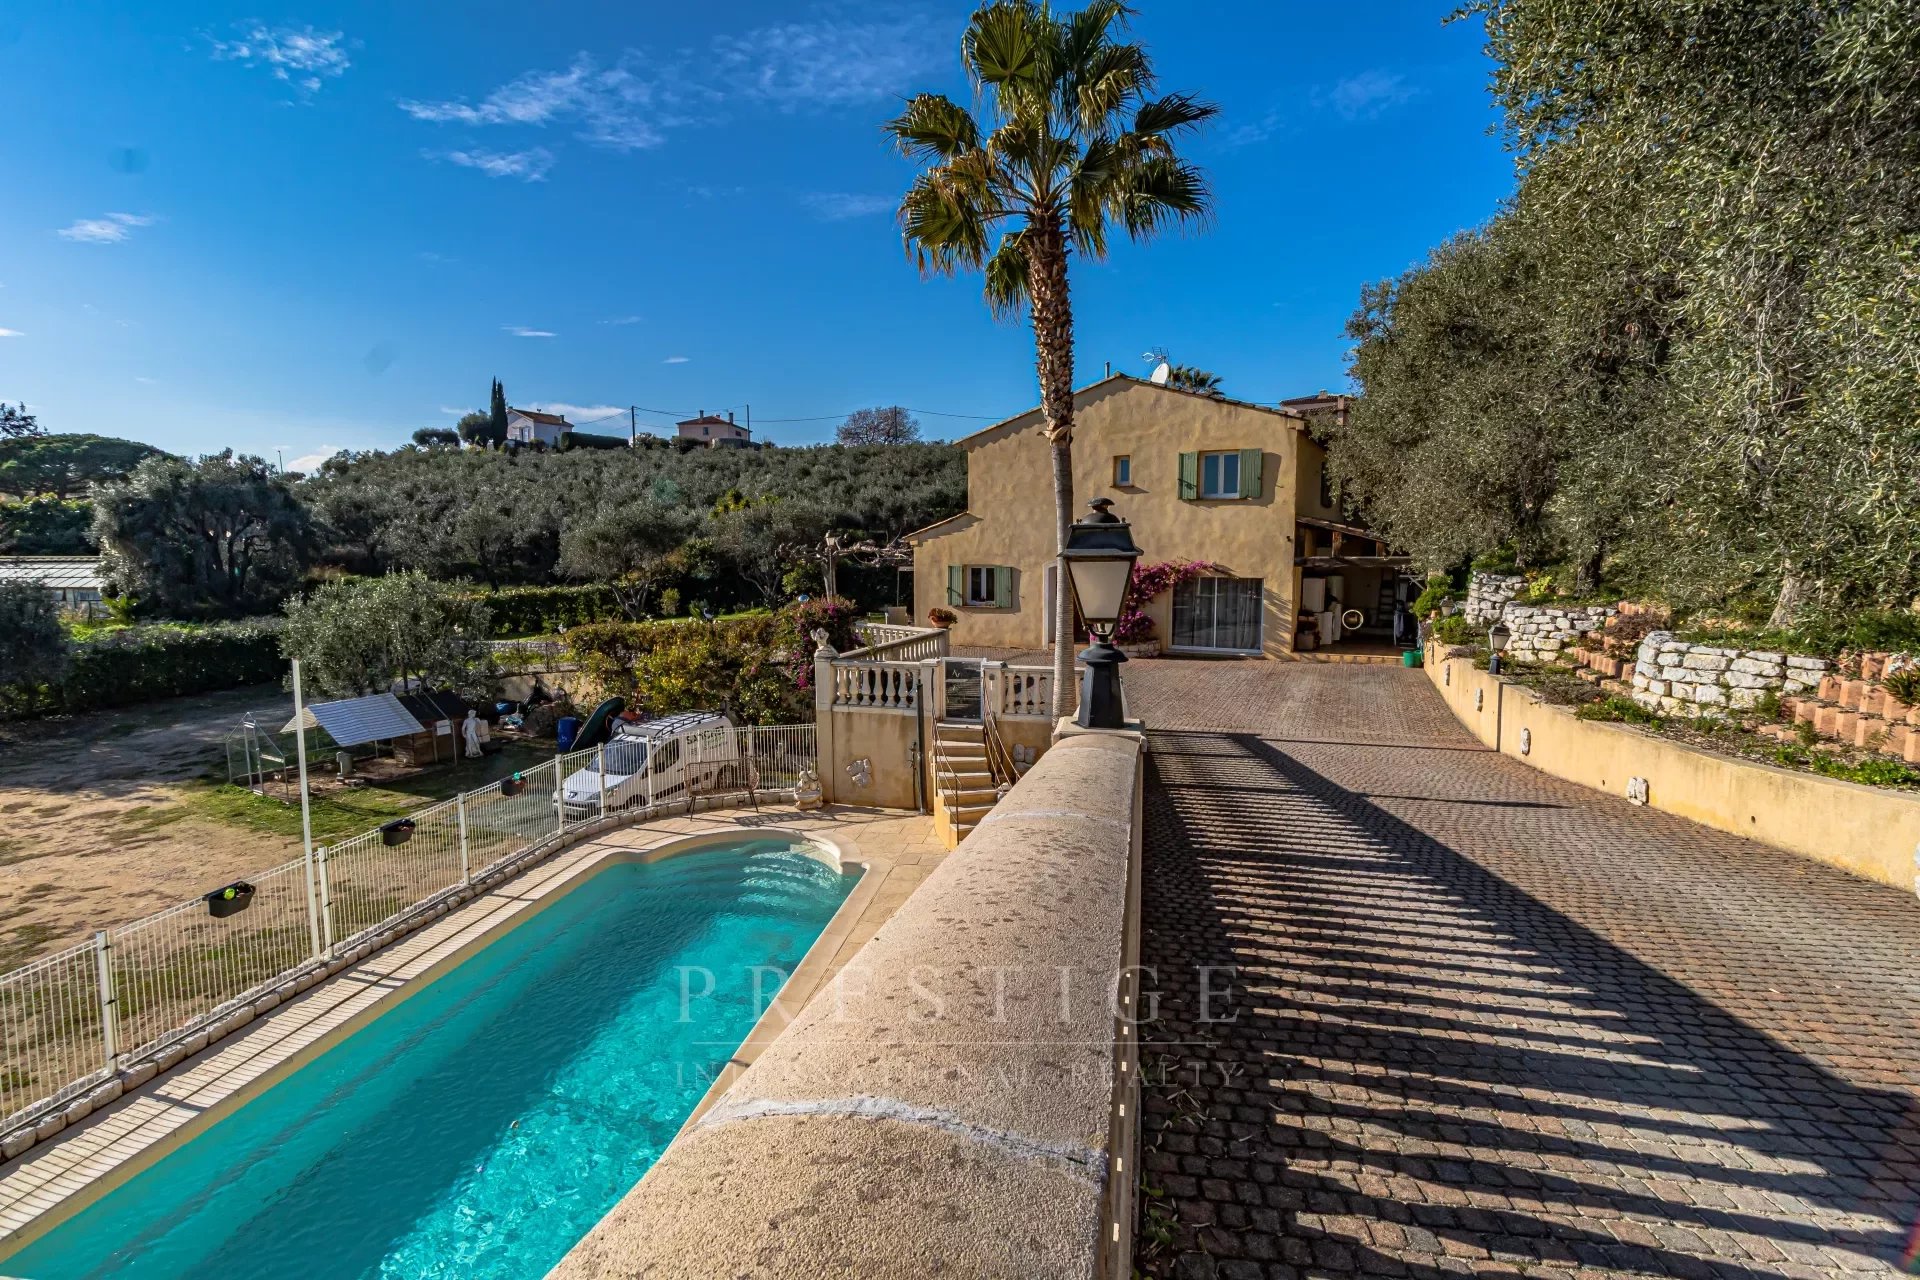 Cagnes sur mer, 146sqm house sea view, private pool